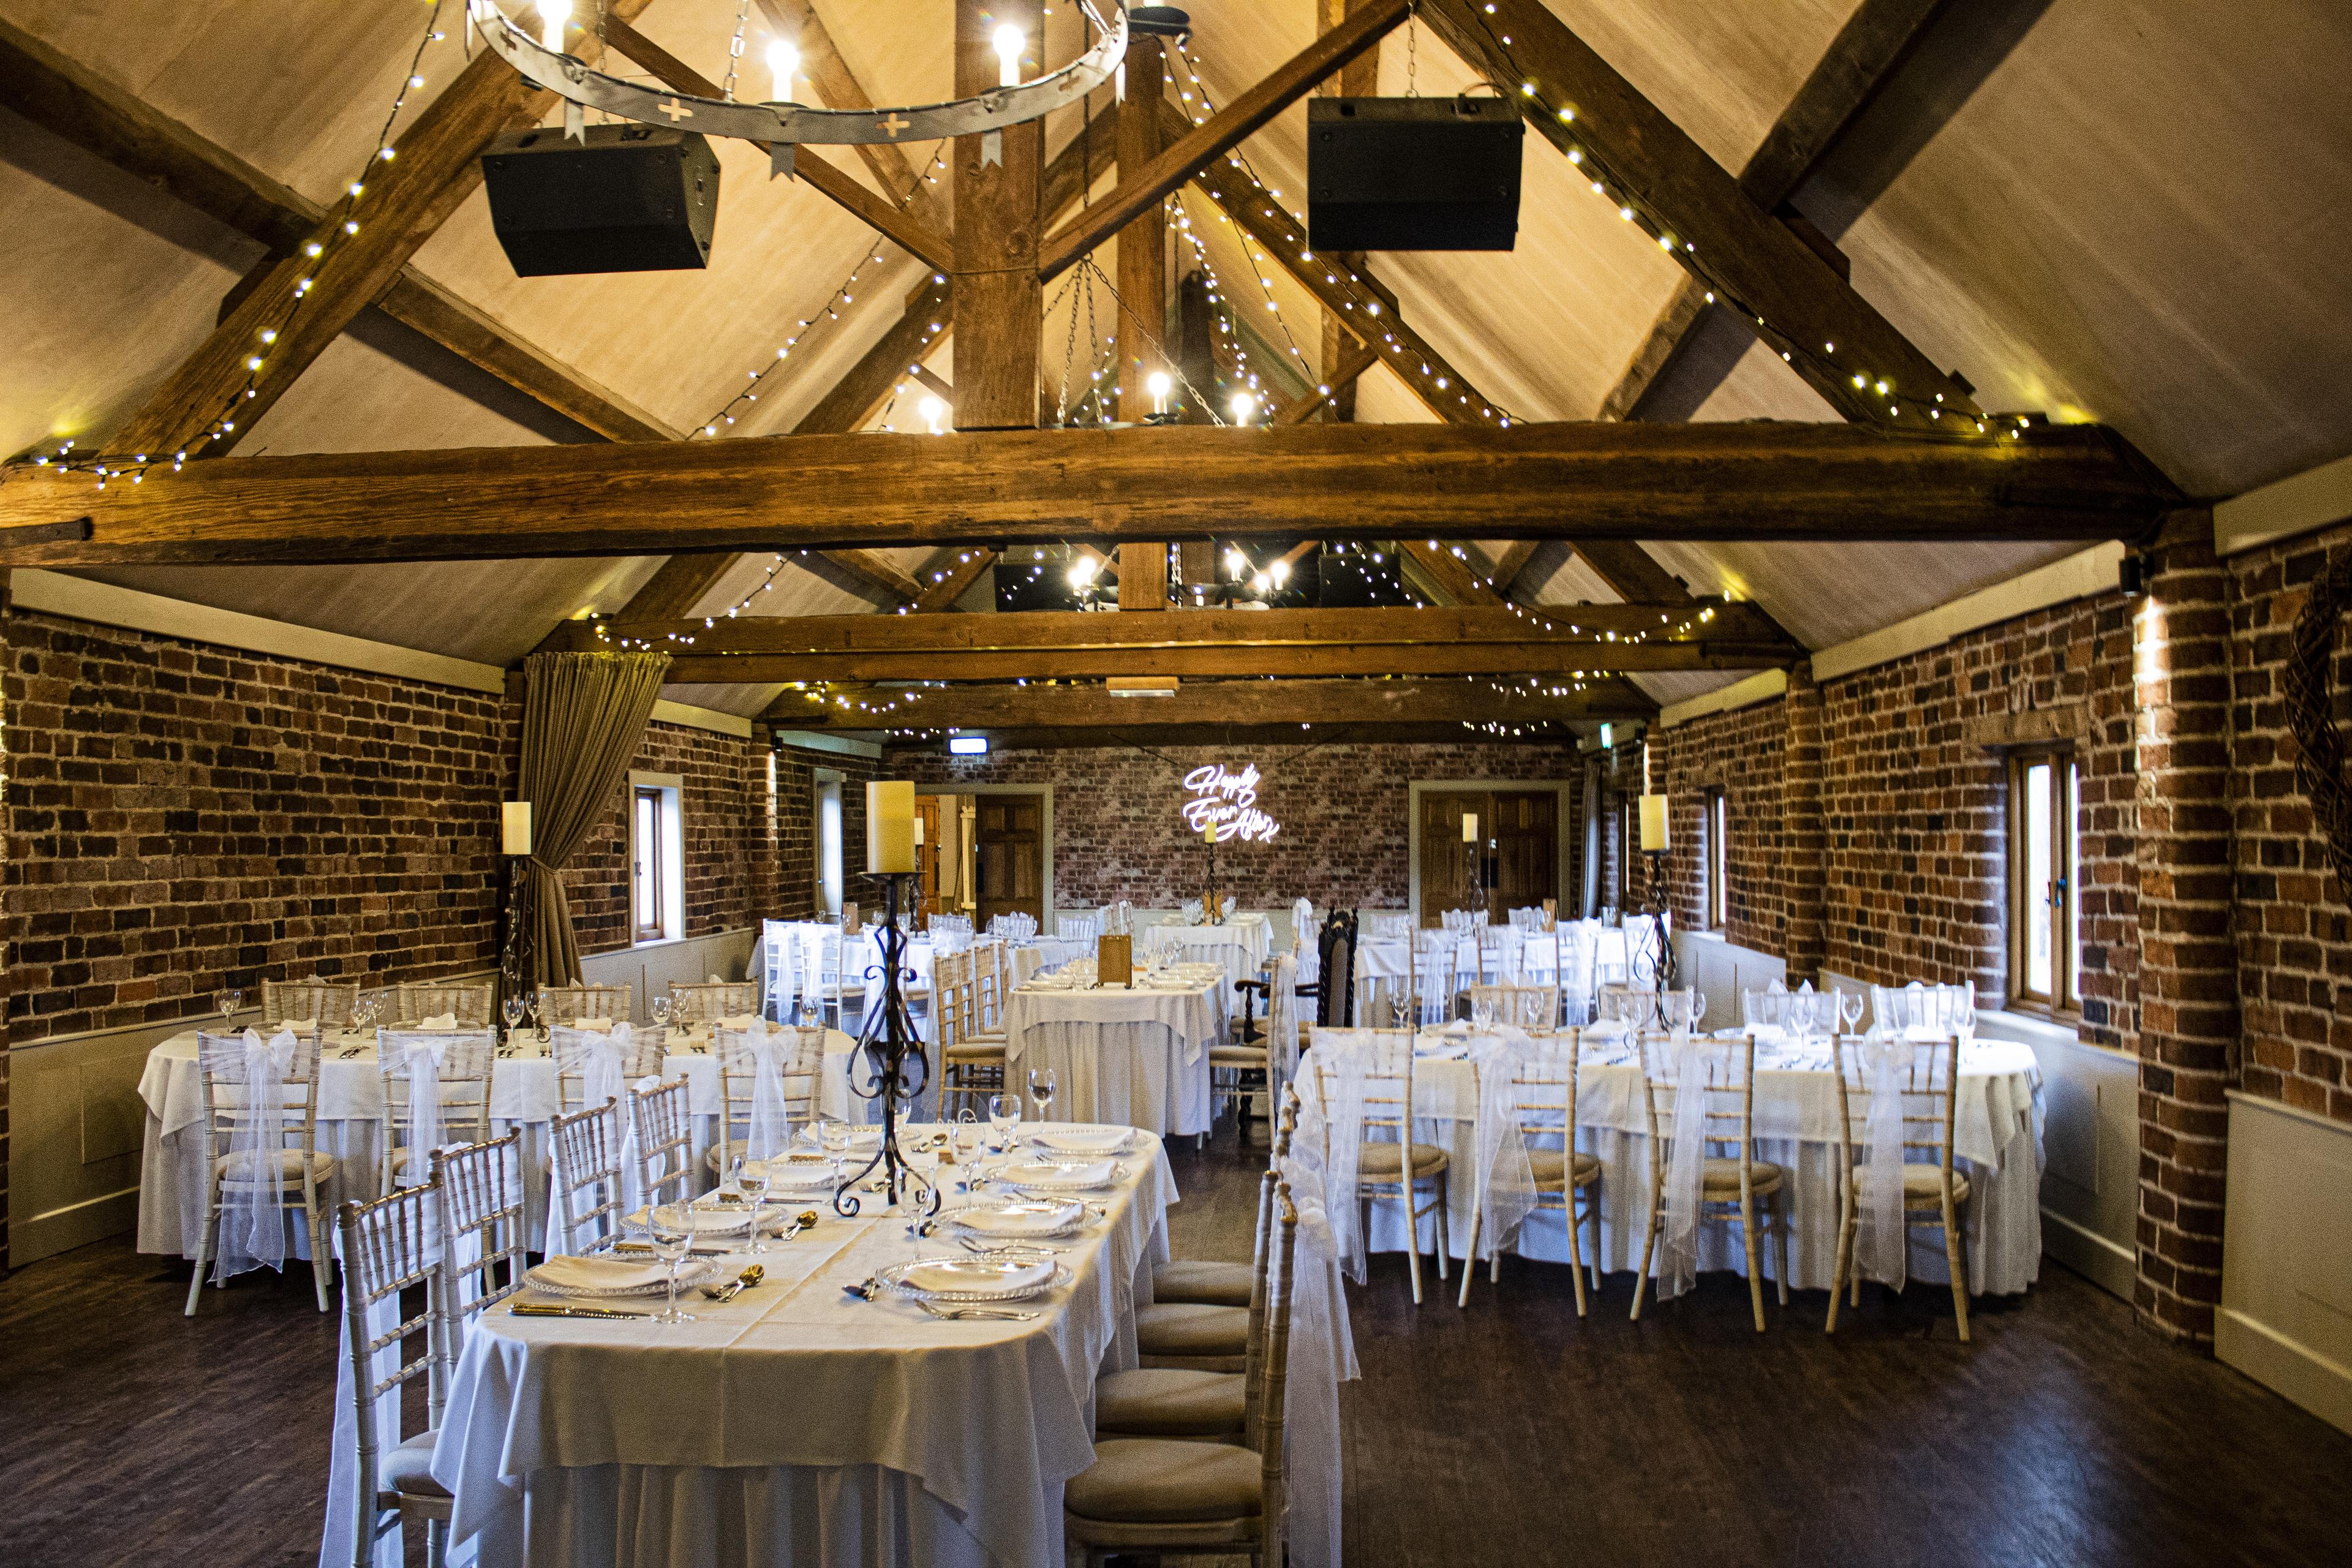 The Maltings Barn Evening Event Hire, The Blakelands Estate photo #1